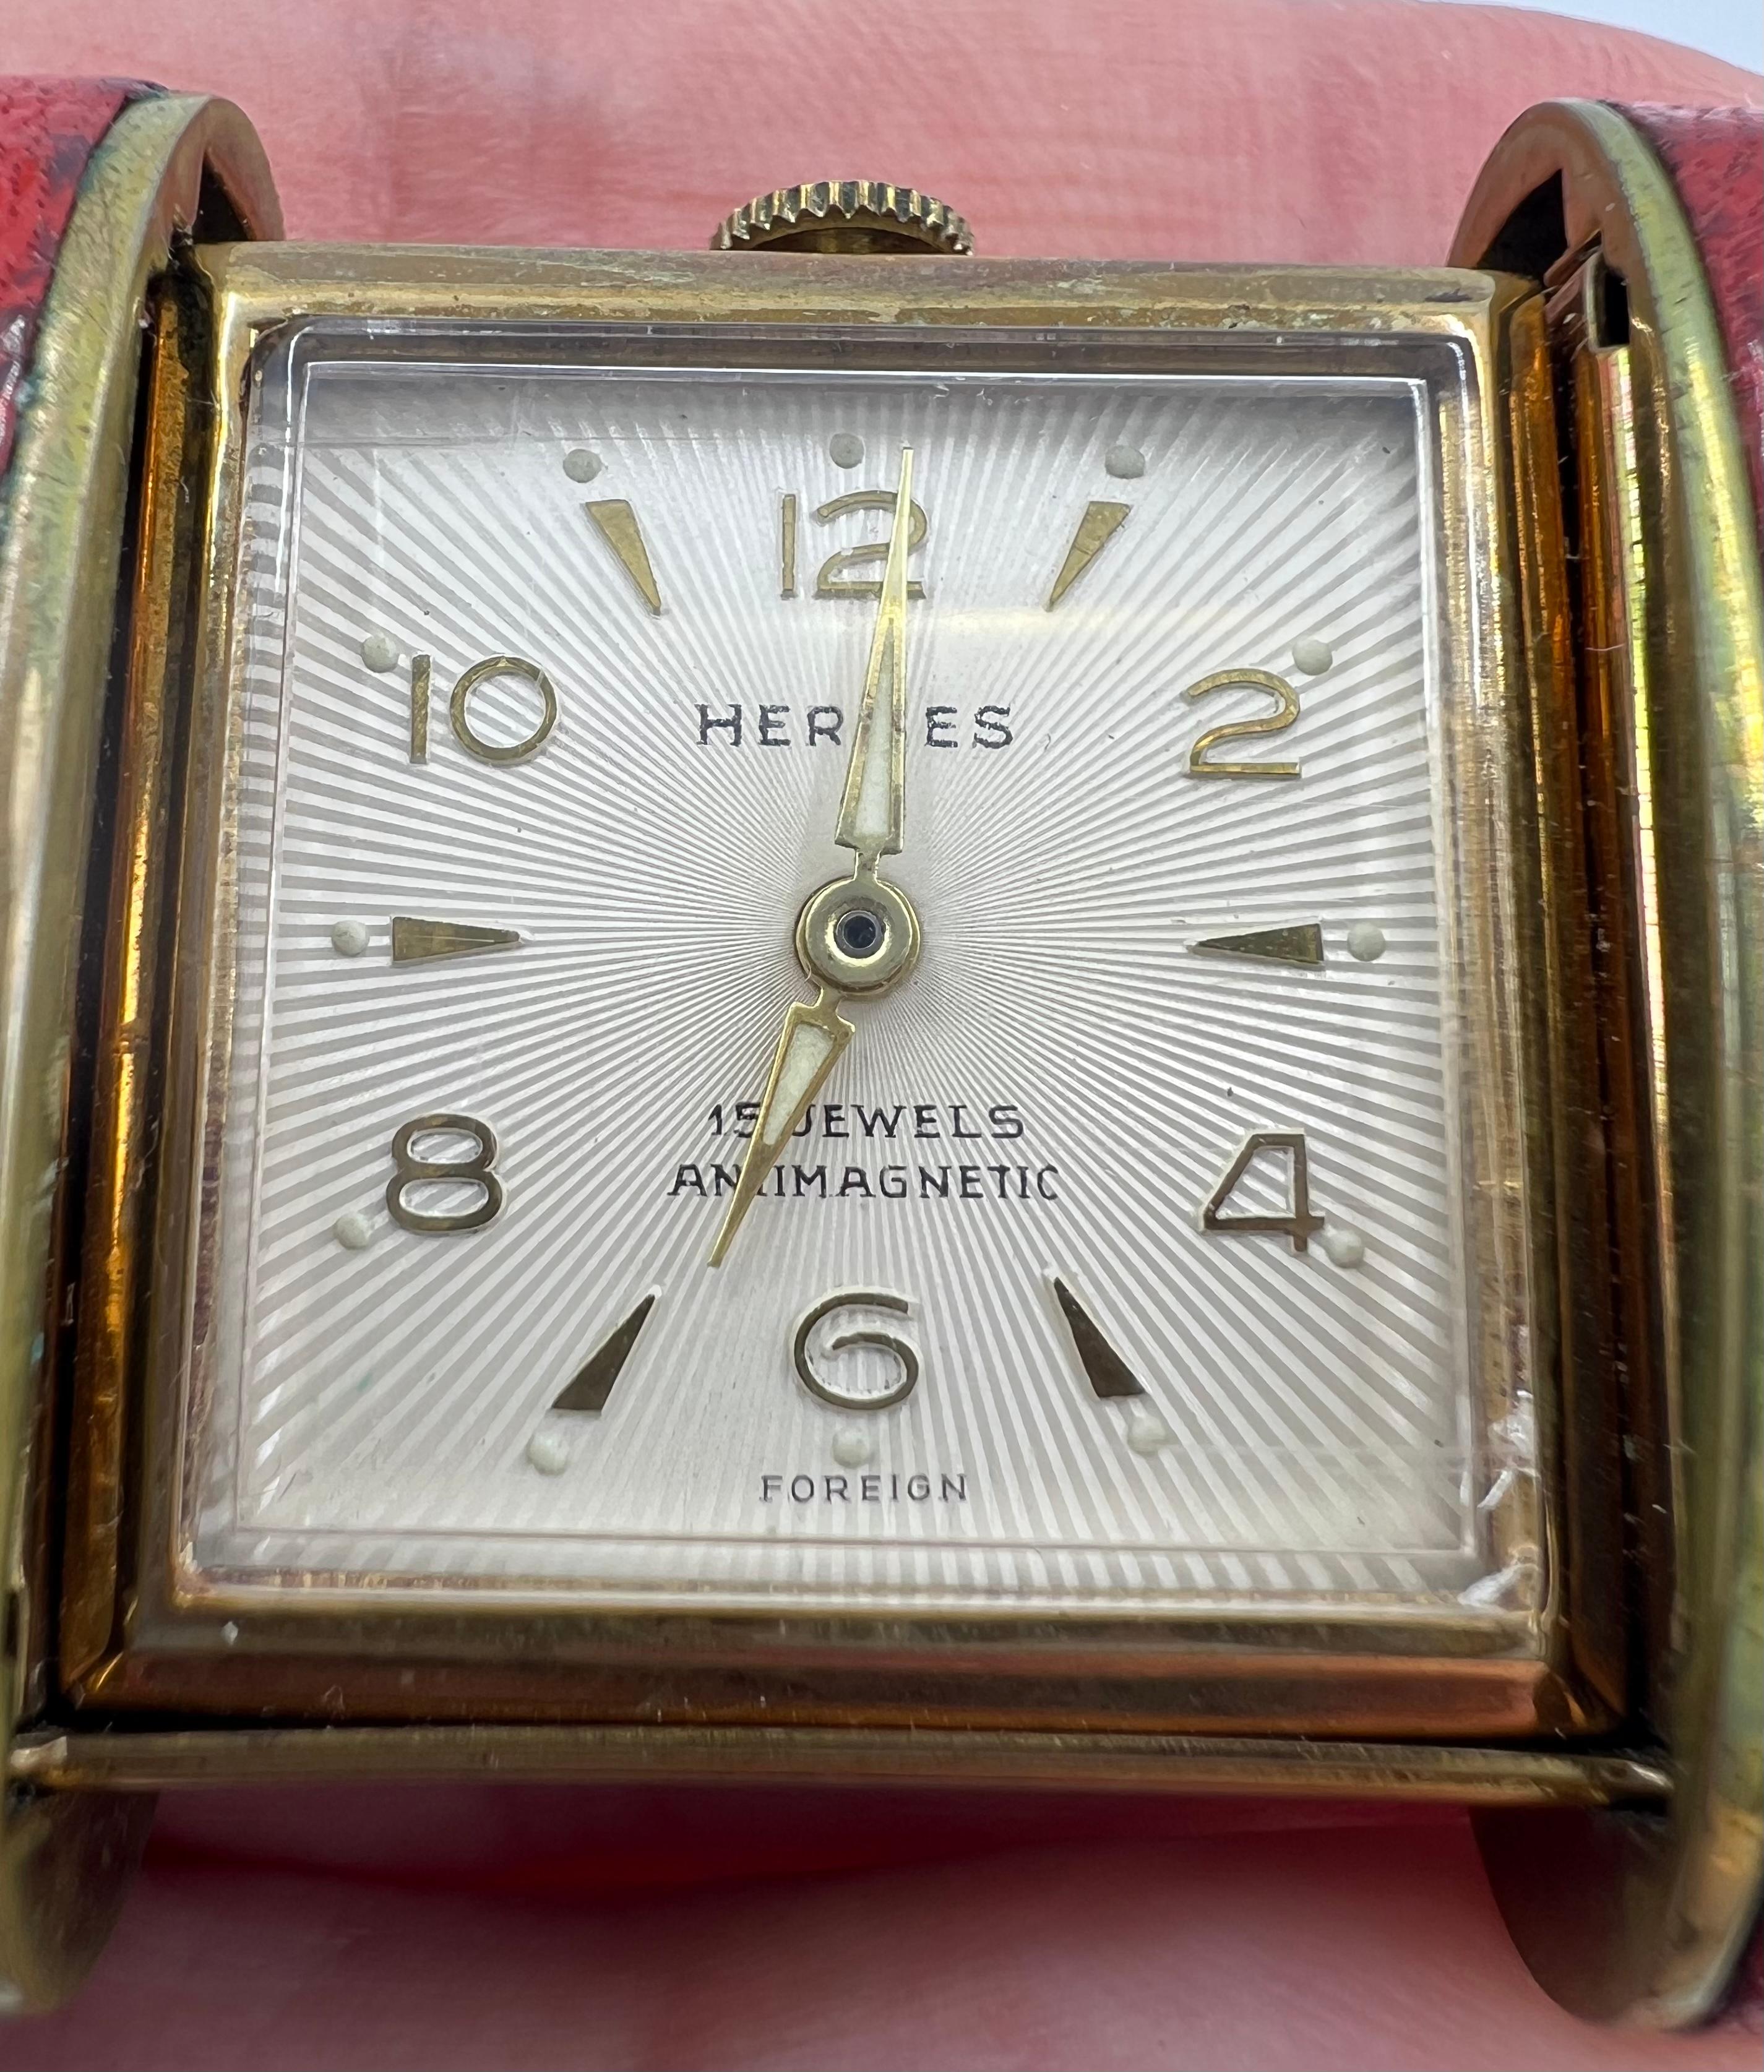 A rare time piece by Hermes, a vintage travel watch. The watch set ina red leather case equipped with a slide opening mechanism.

​The face is square shape, with a white dial and gold alpha shaped hands. Gold Arabic numerals alternate with gold